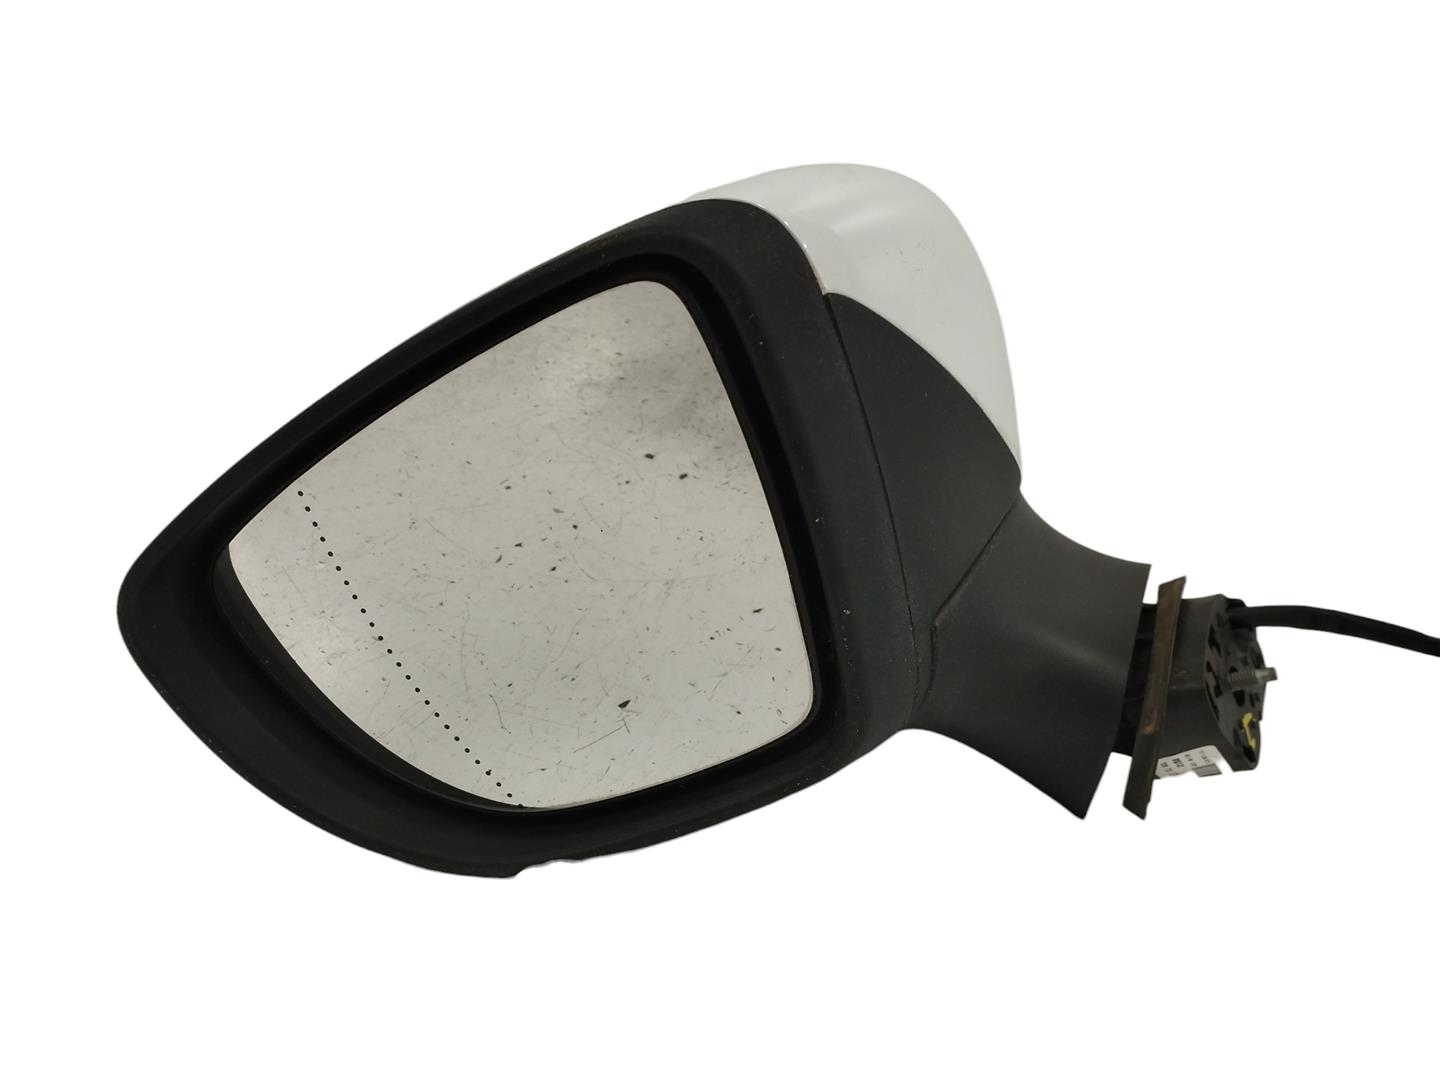 RENAULT Clio 4 generation (2012-2020) Left Side Wing Mirror 963025724R, 7CABLES 24060198